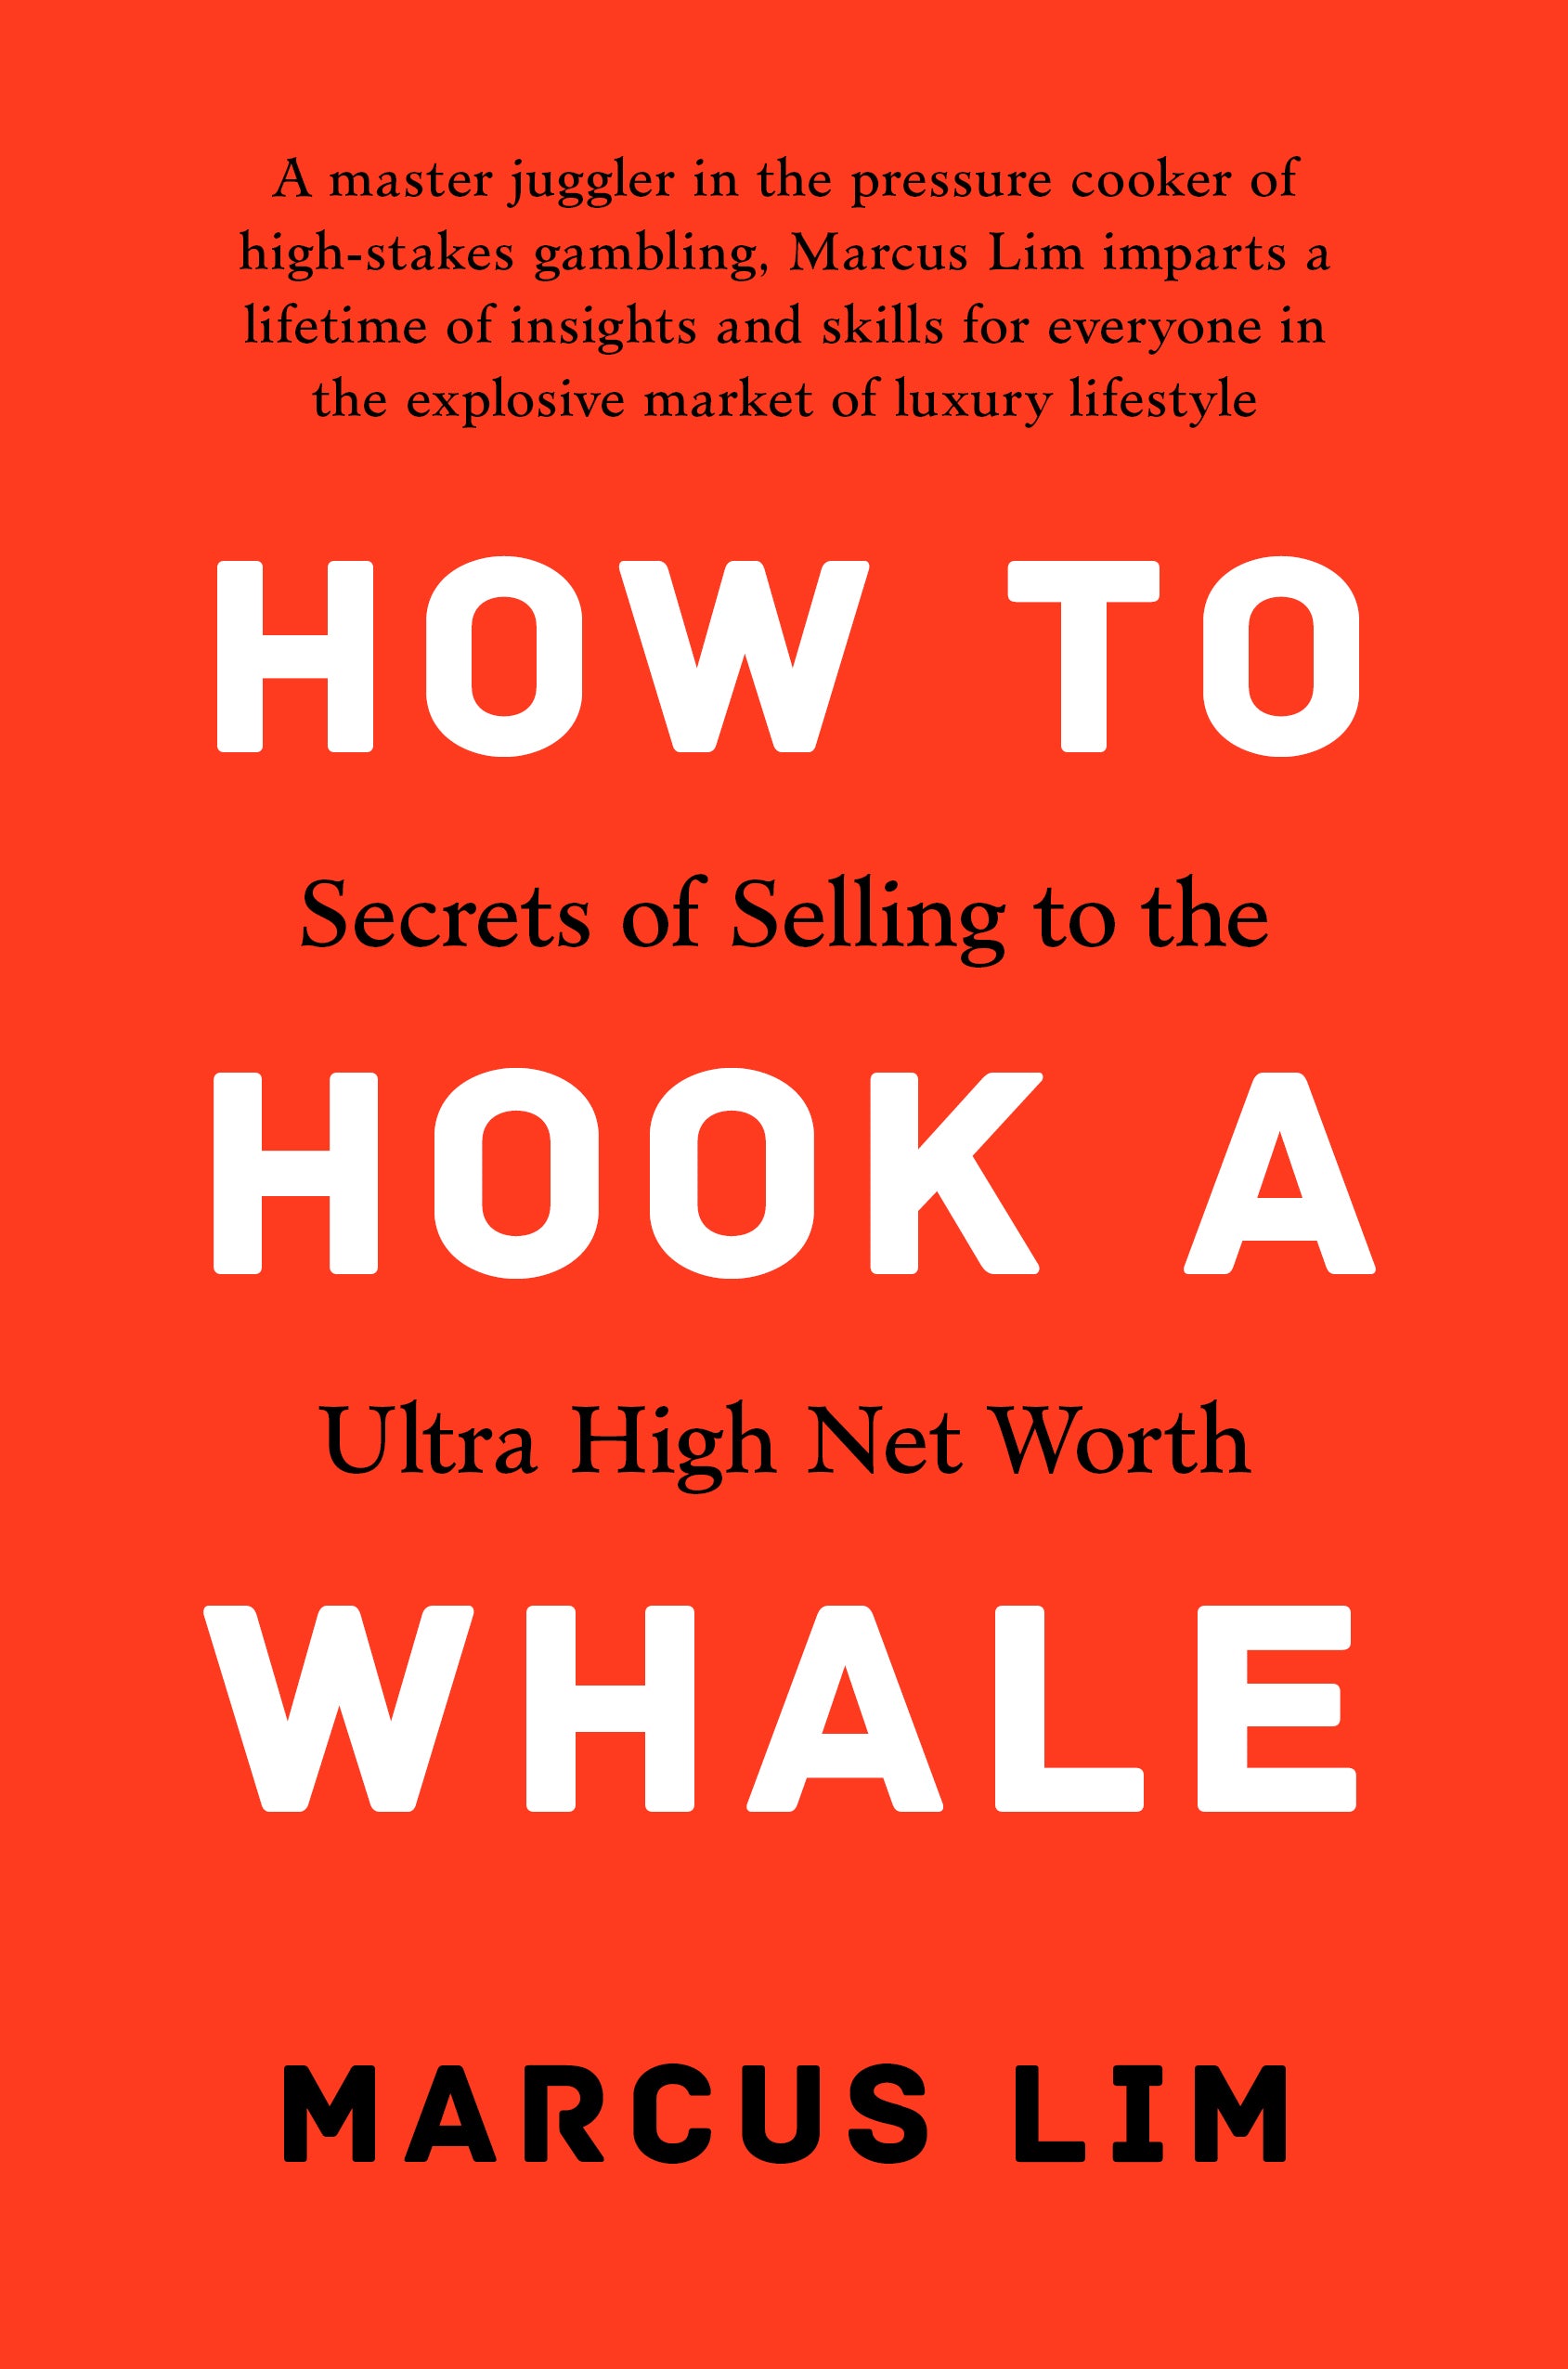 How To Hook A Whale